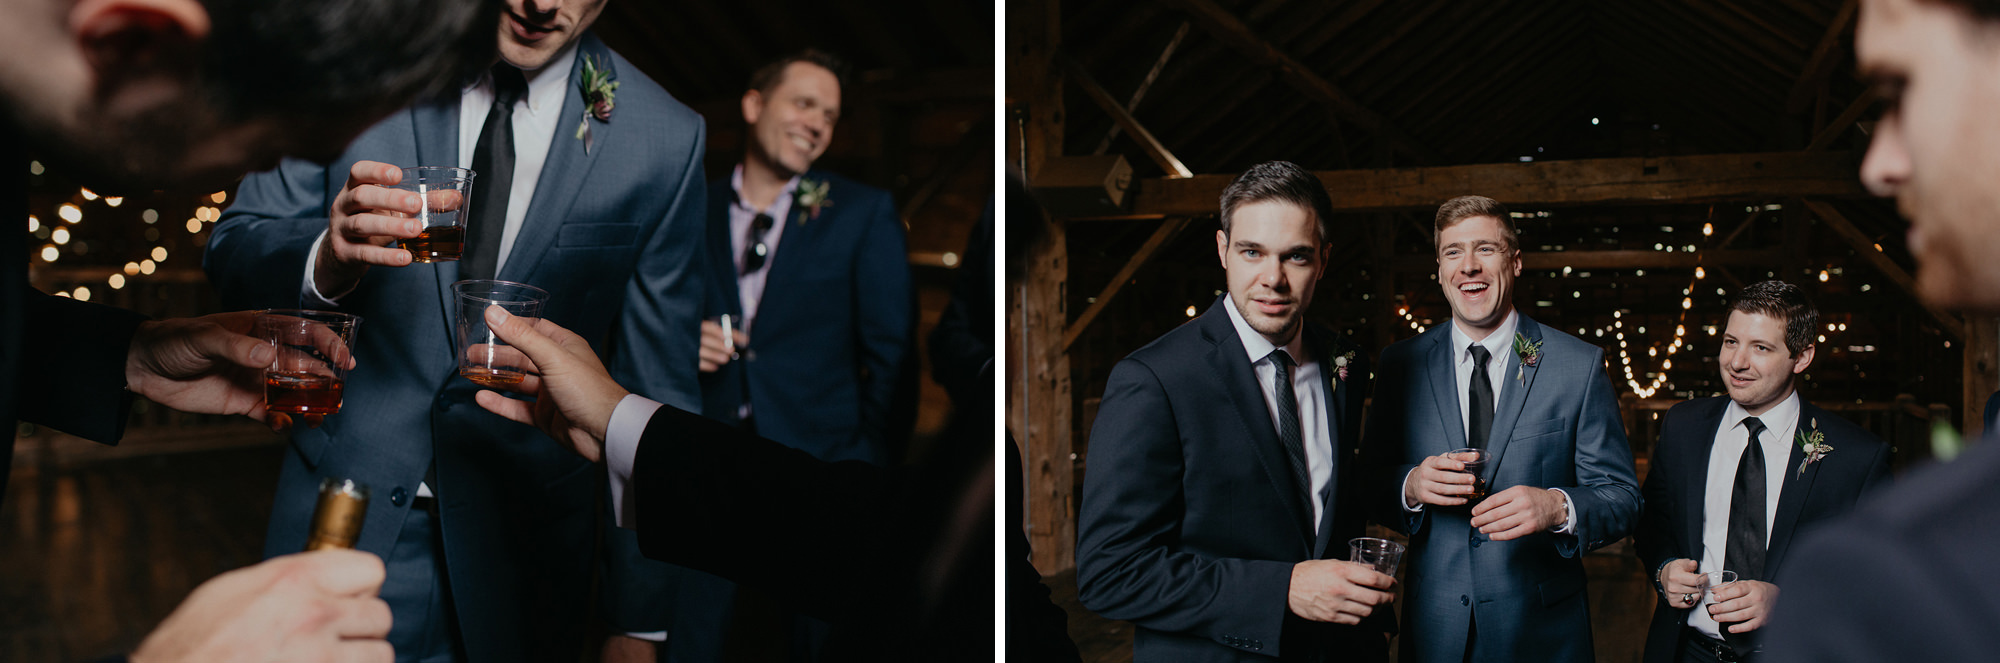 Kate+Andrew-024